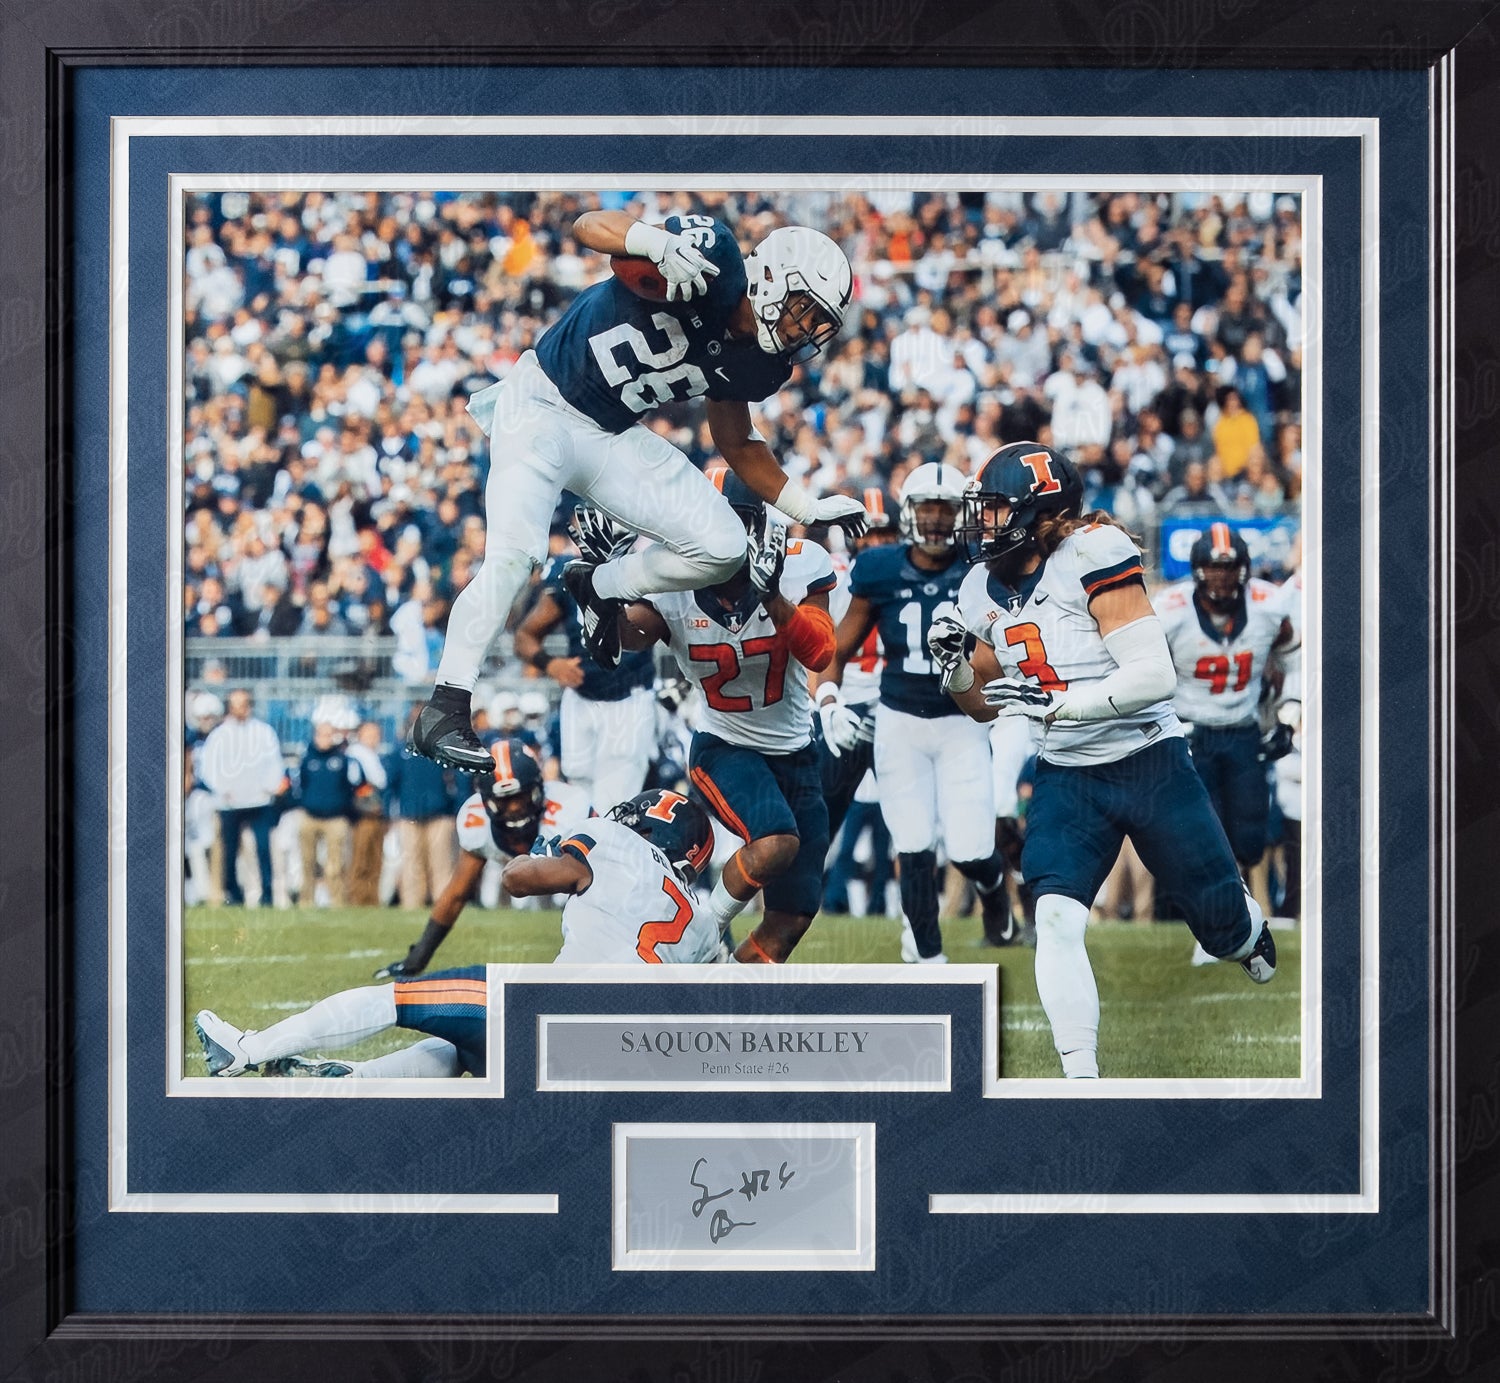 Saquon Barkley Penn State Nittany Lions College Football Framed Photo with Engraved Autograph - Dynasty Sports & Framing 